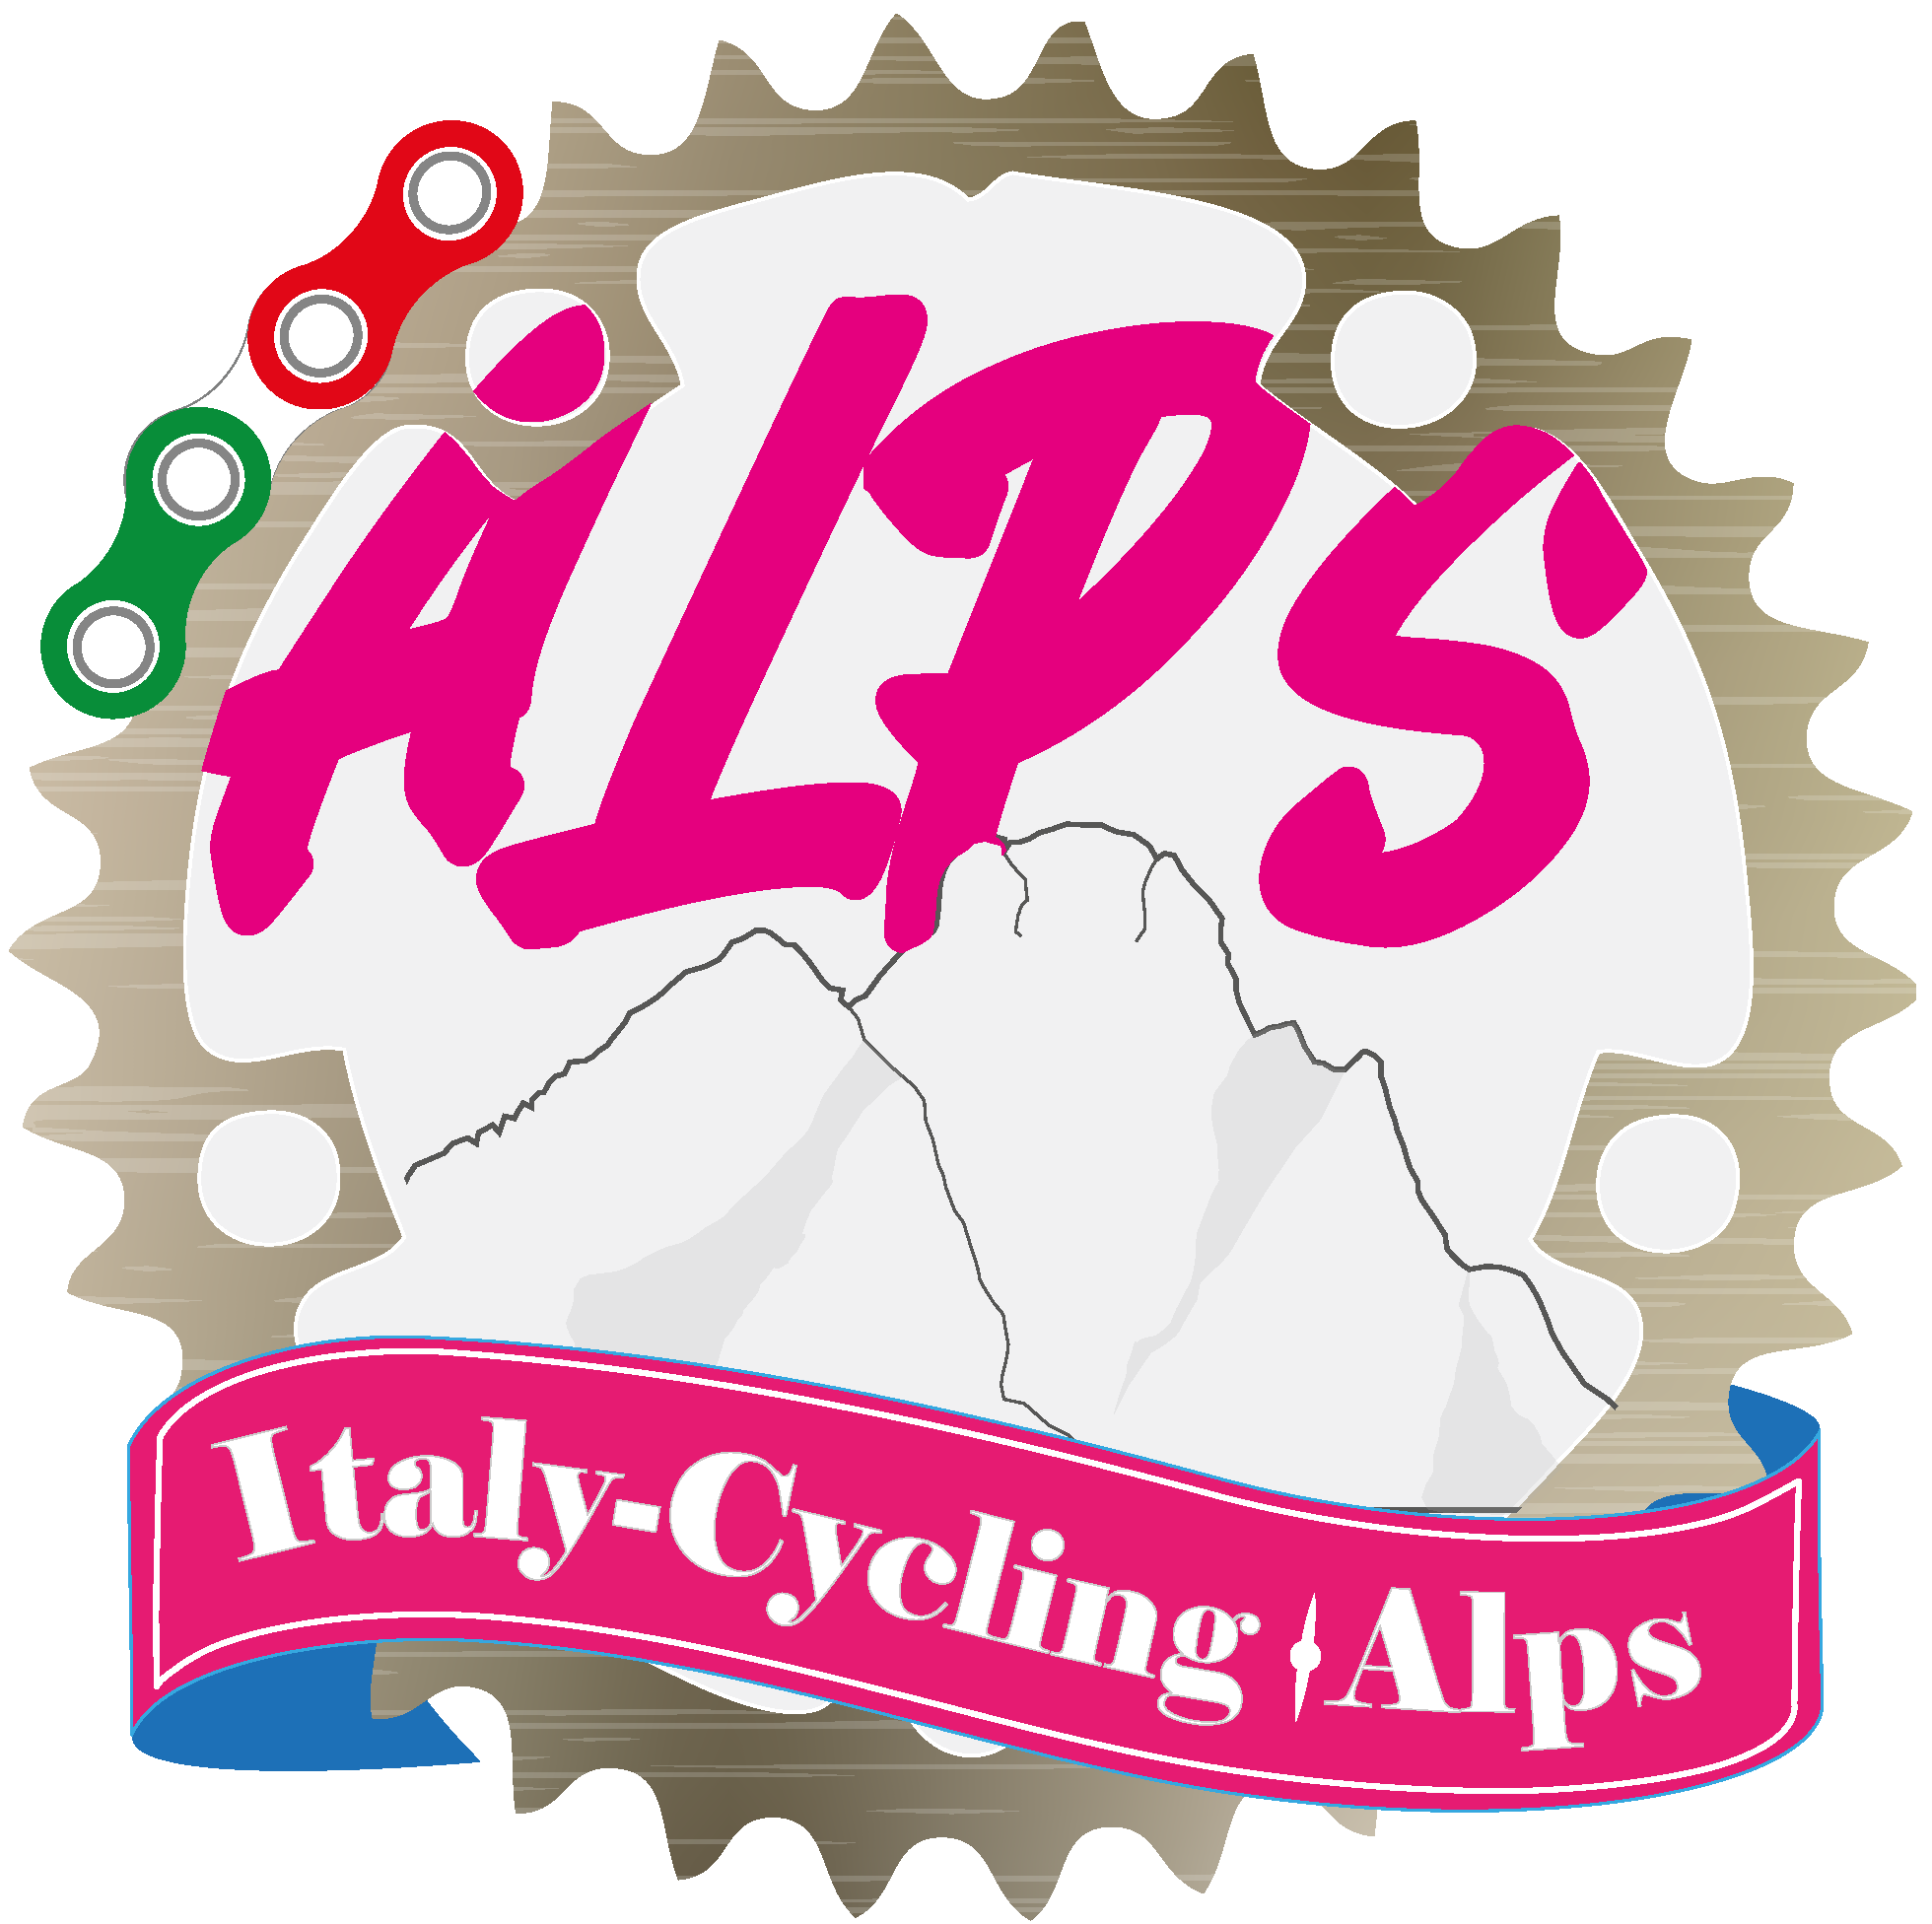 Bicycle rental in Valle d'Aosta